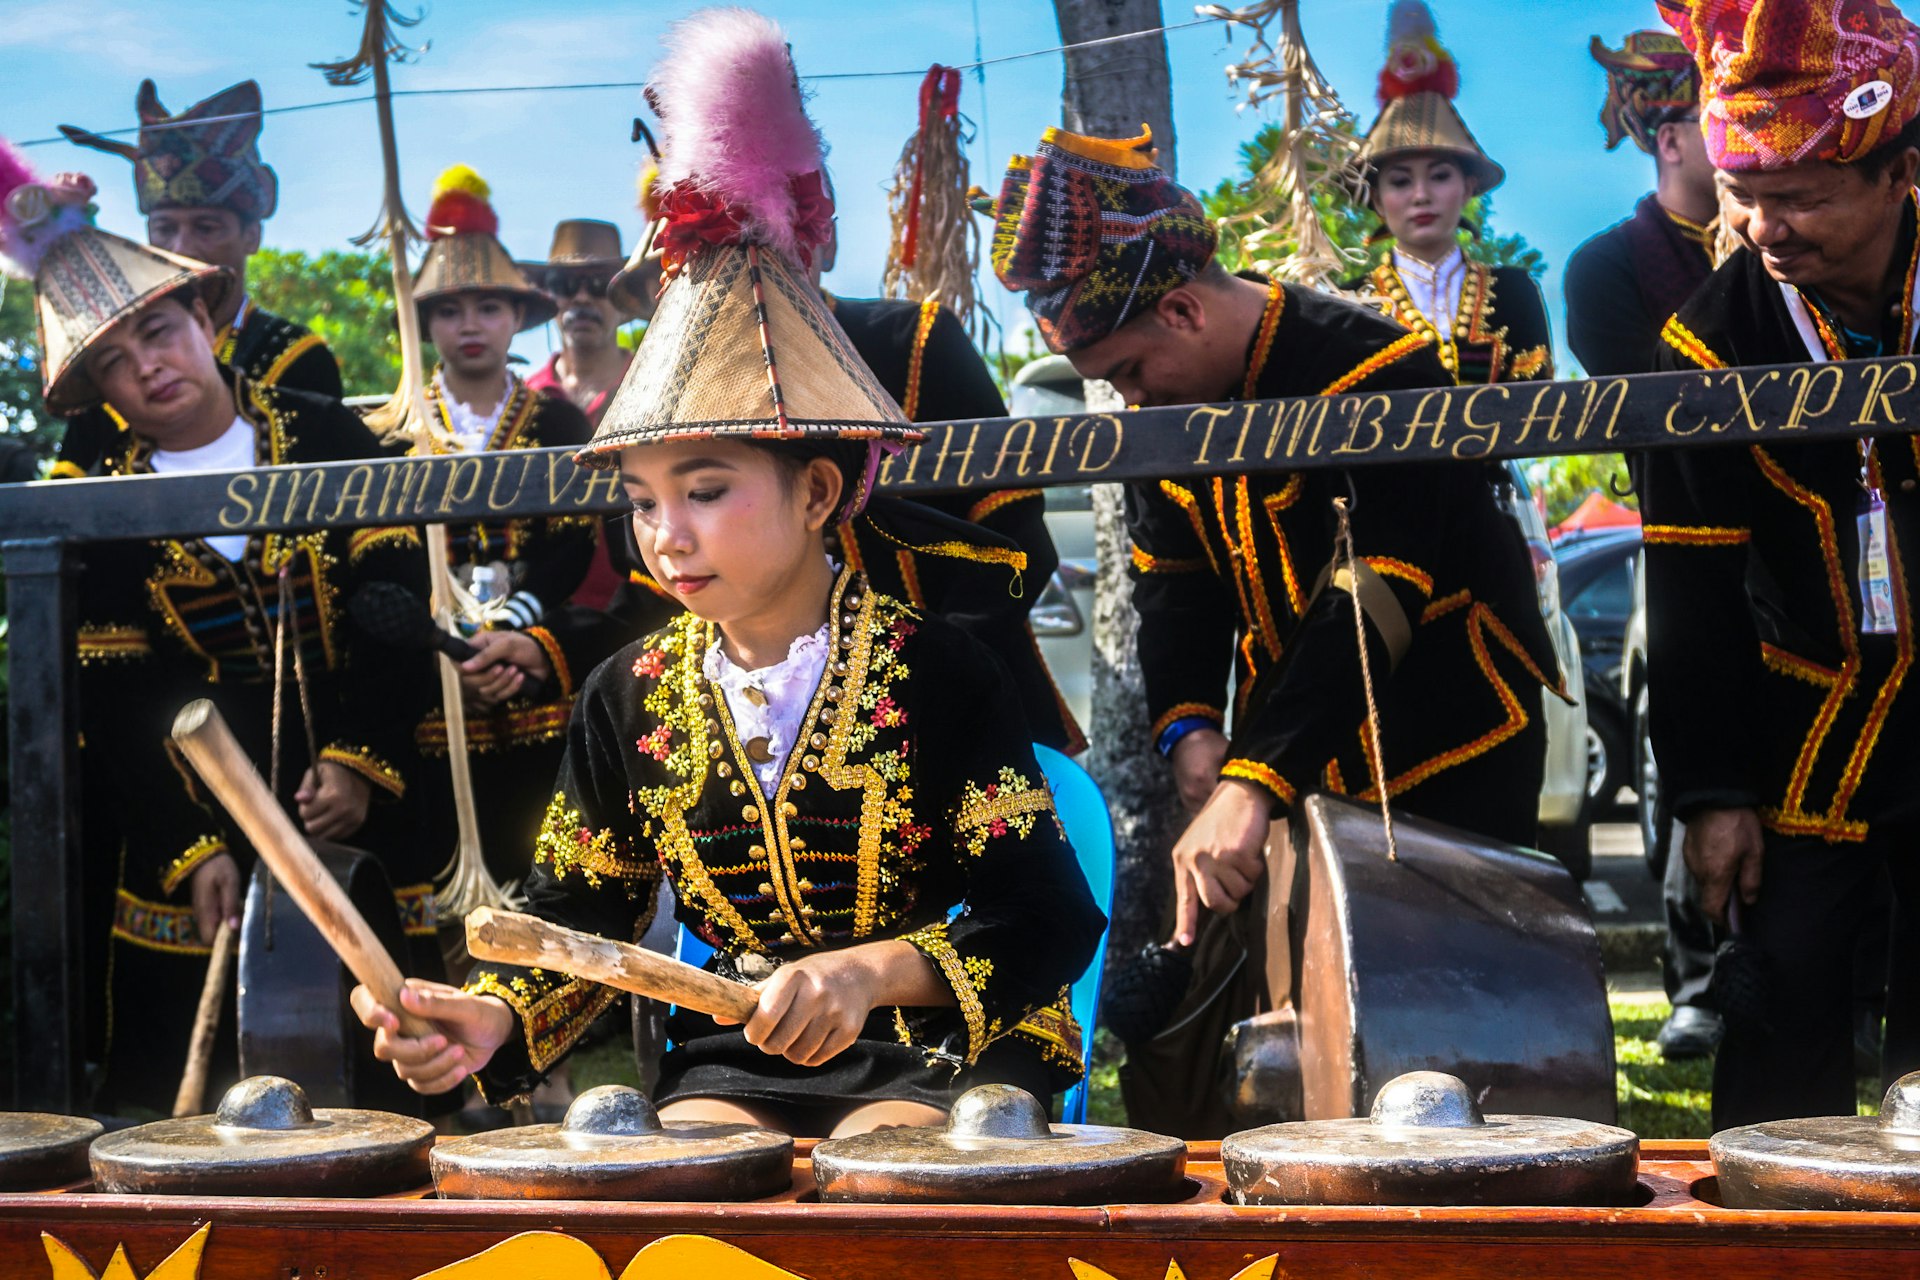 Girl from the Kadazandusun ethnic group playing a gong during the Sabah Harvest Festival